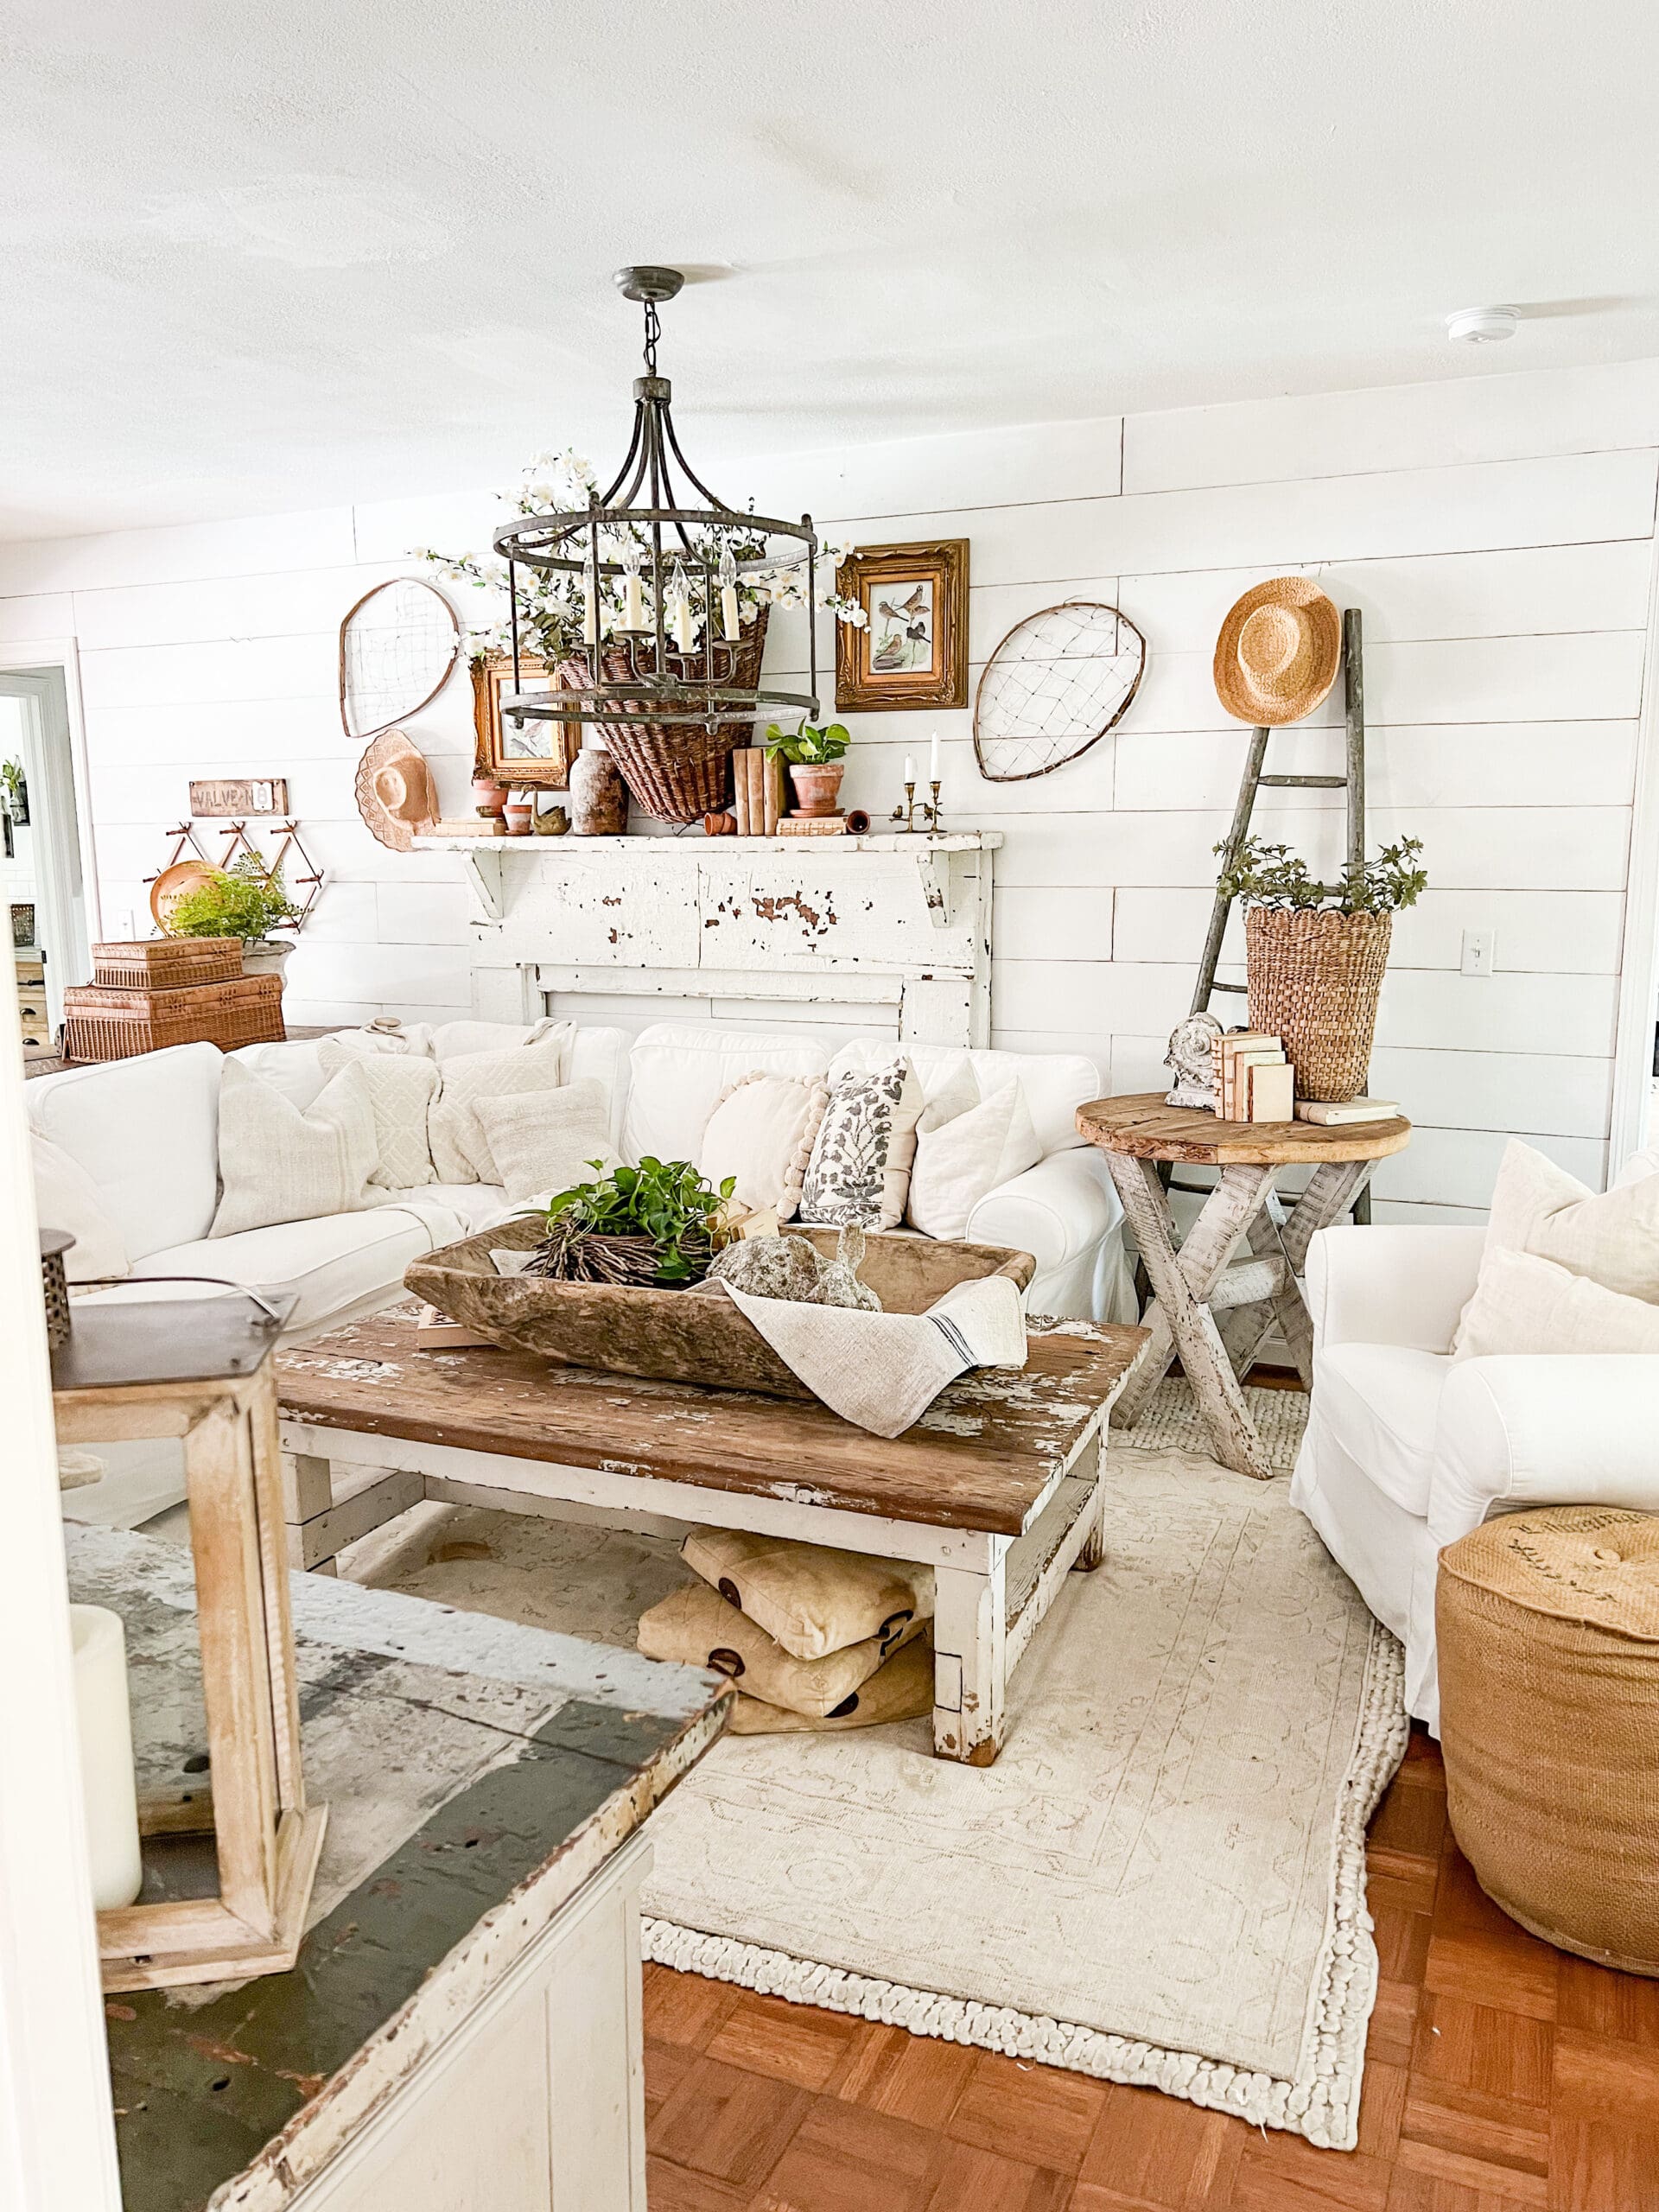 How To Decorate With Yard Finds